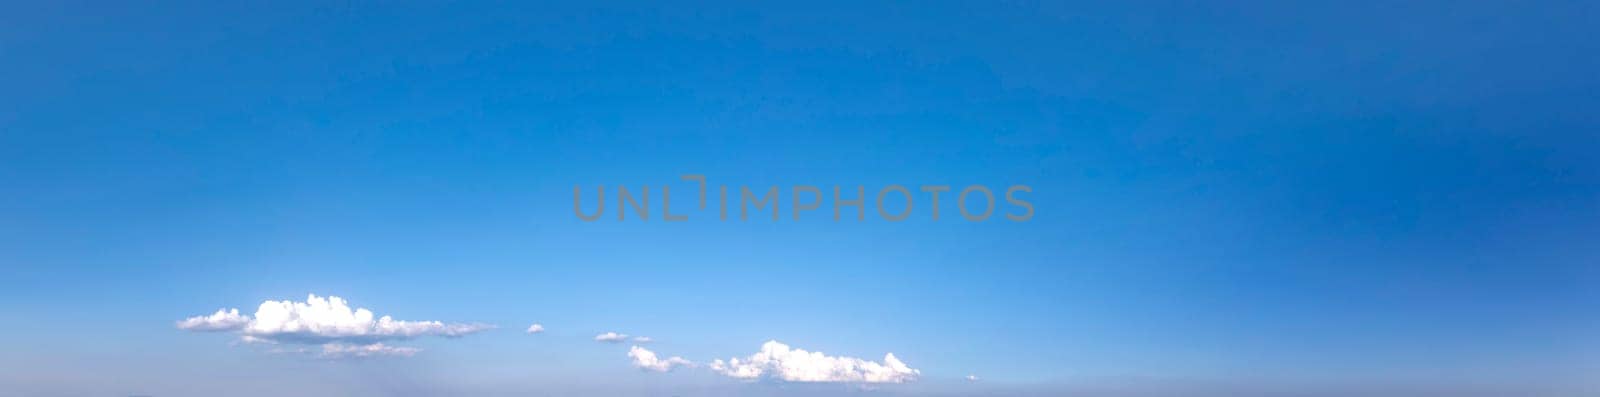 Panoramic view of clear blue sky with some clouds.